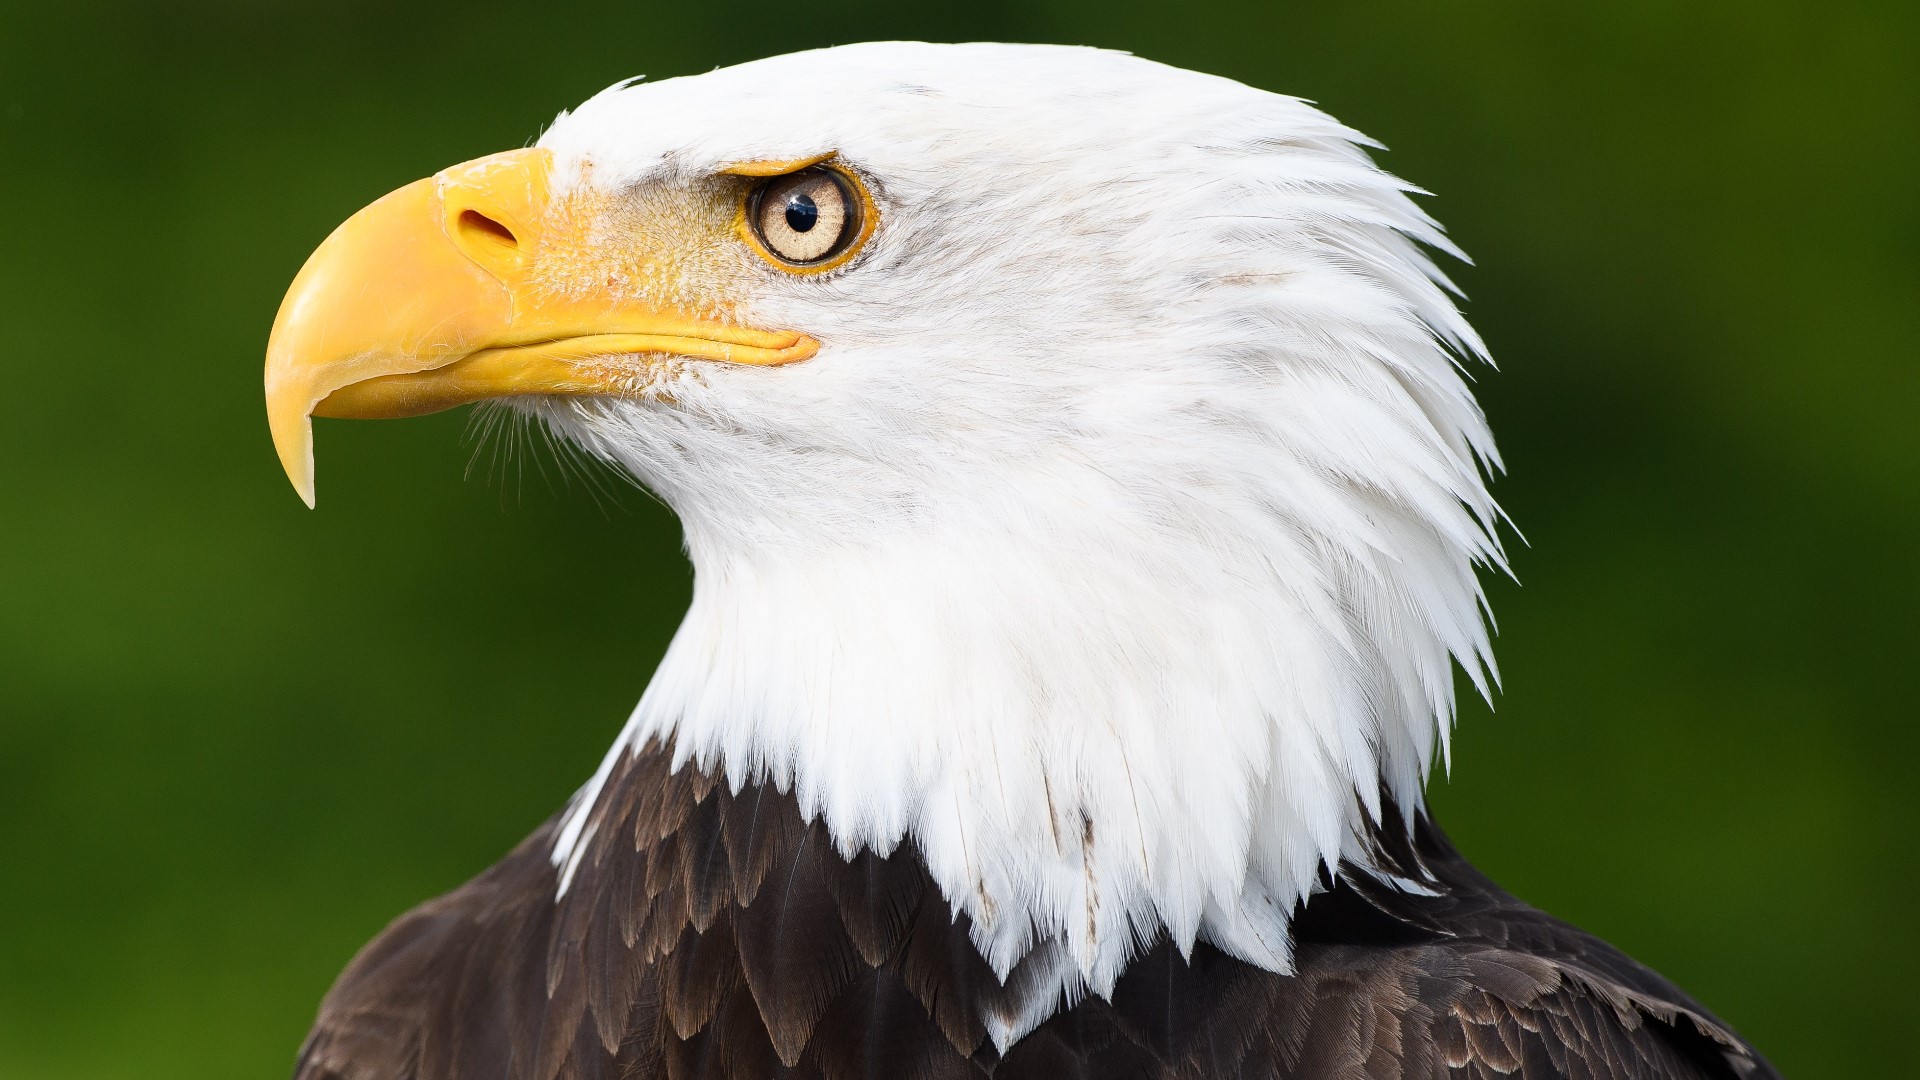 Two bald eagles were found shot dead in Arkansas earlier this year and police are still searching for those responsible.